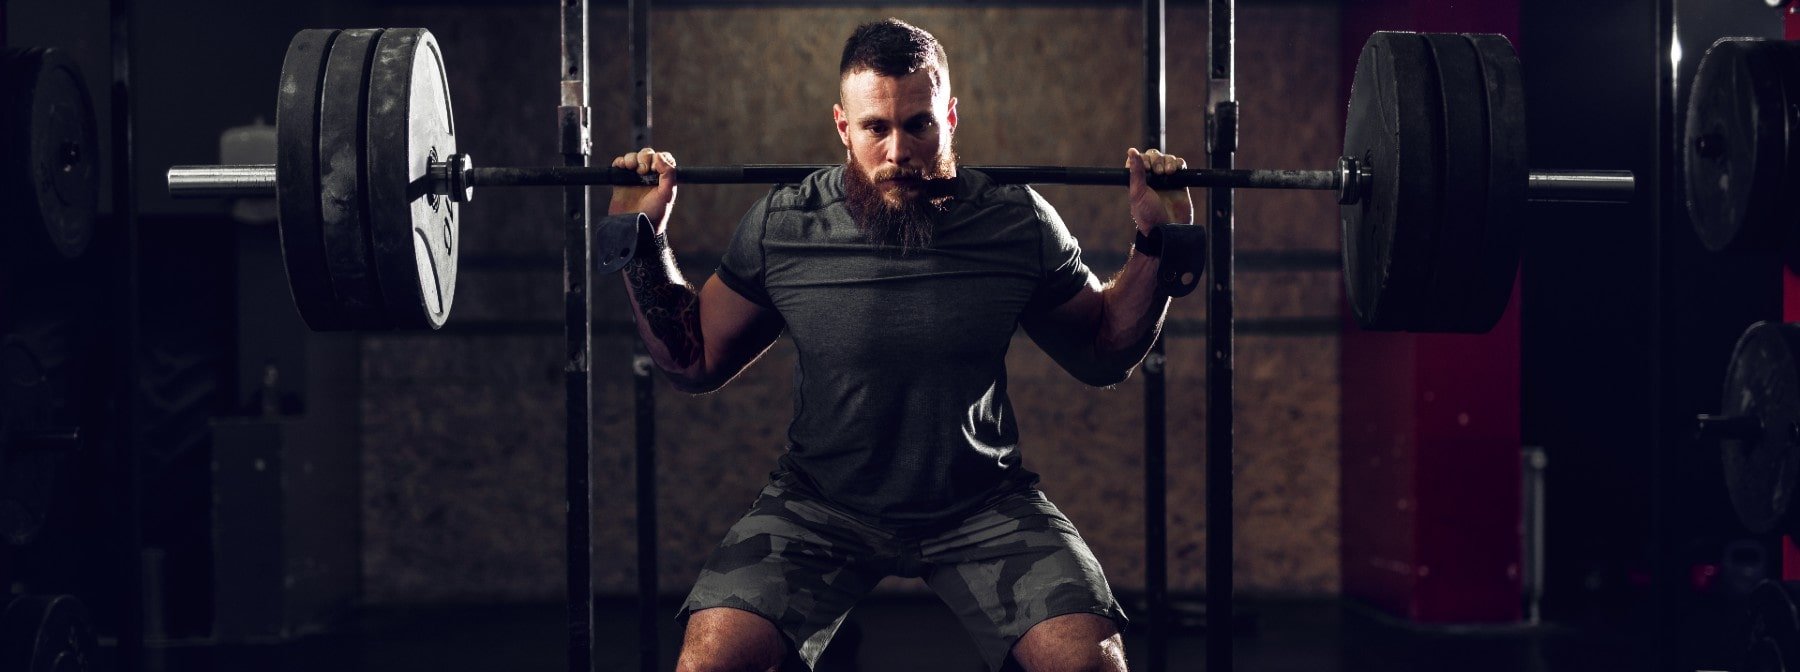 The Barbell Back Squat Form, Muscles & Main Benefits - Graduate Fitness